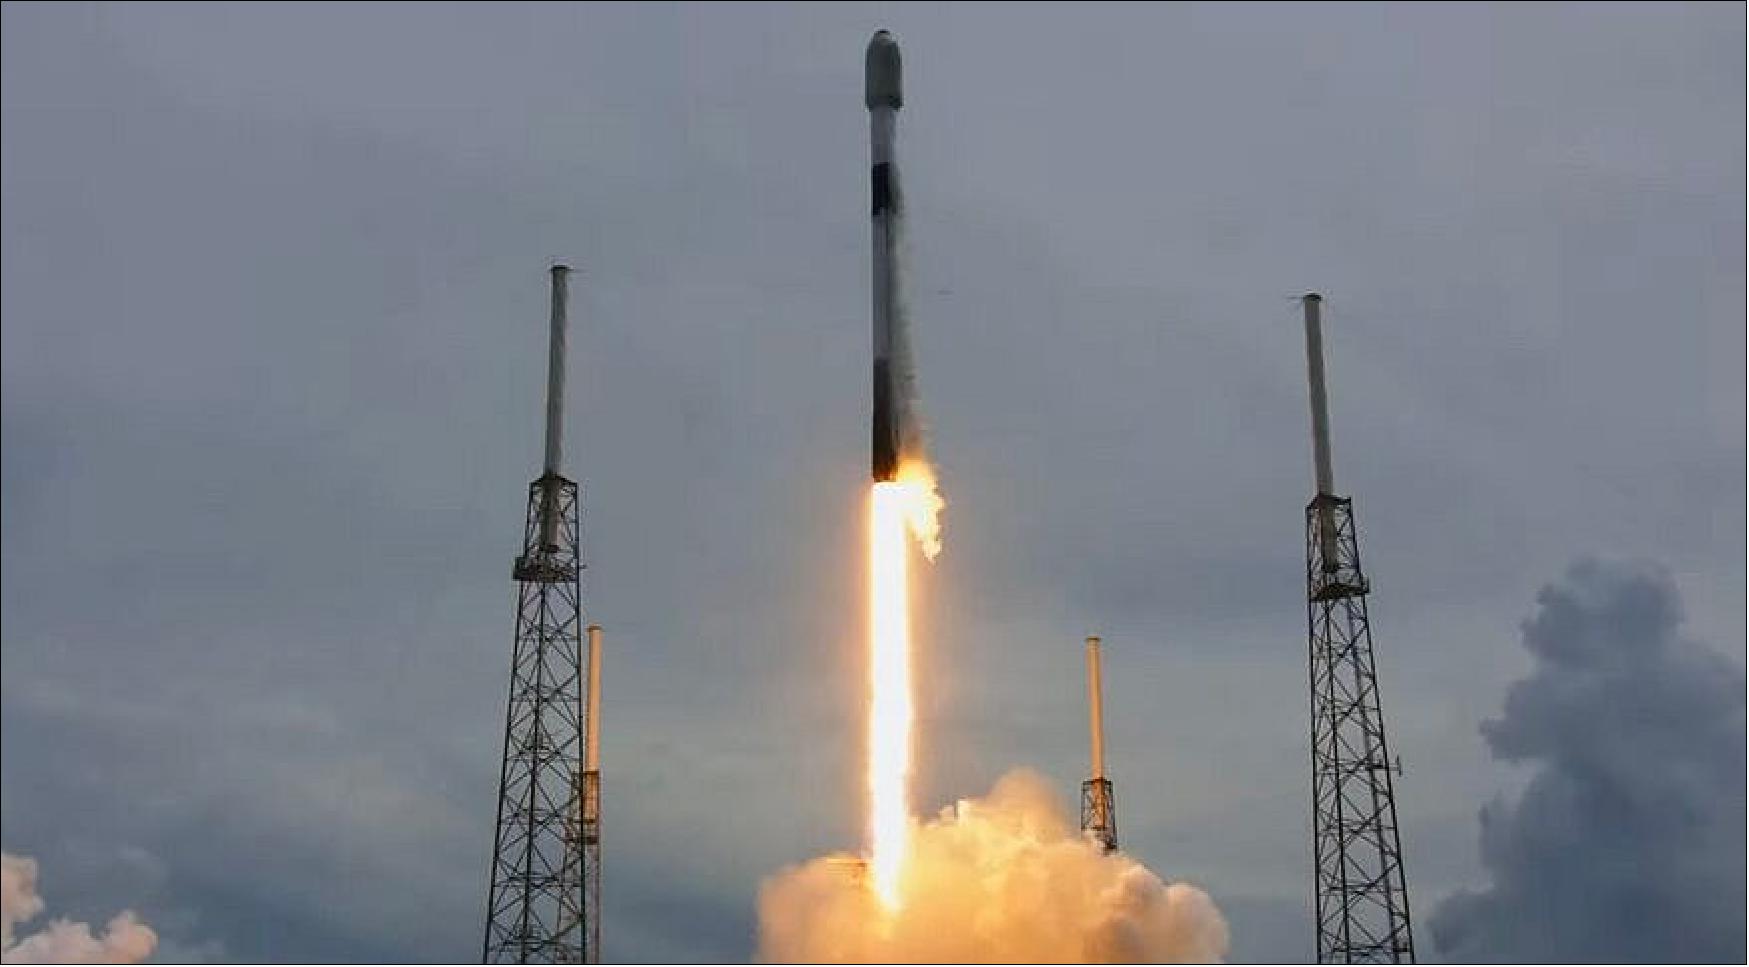 Figure 6: A SpaceX Falcon 9 lifts off June 30 on the Transporter-2 rideshare mission, with 88 satellites on board (image credit: SpaceX webcast)